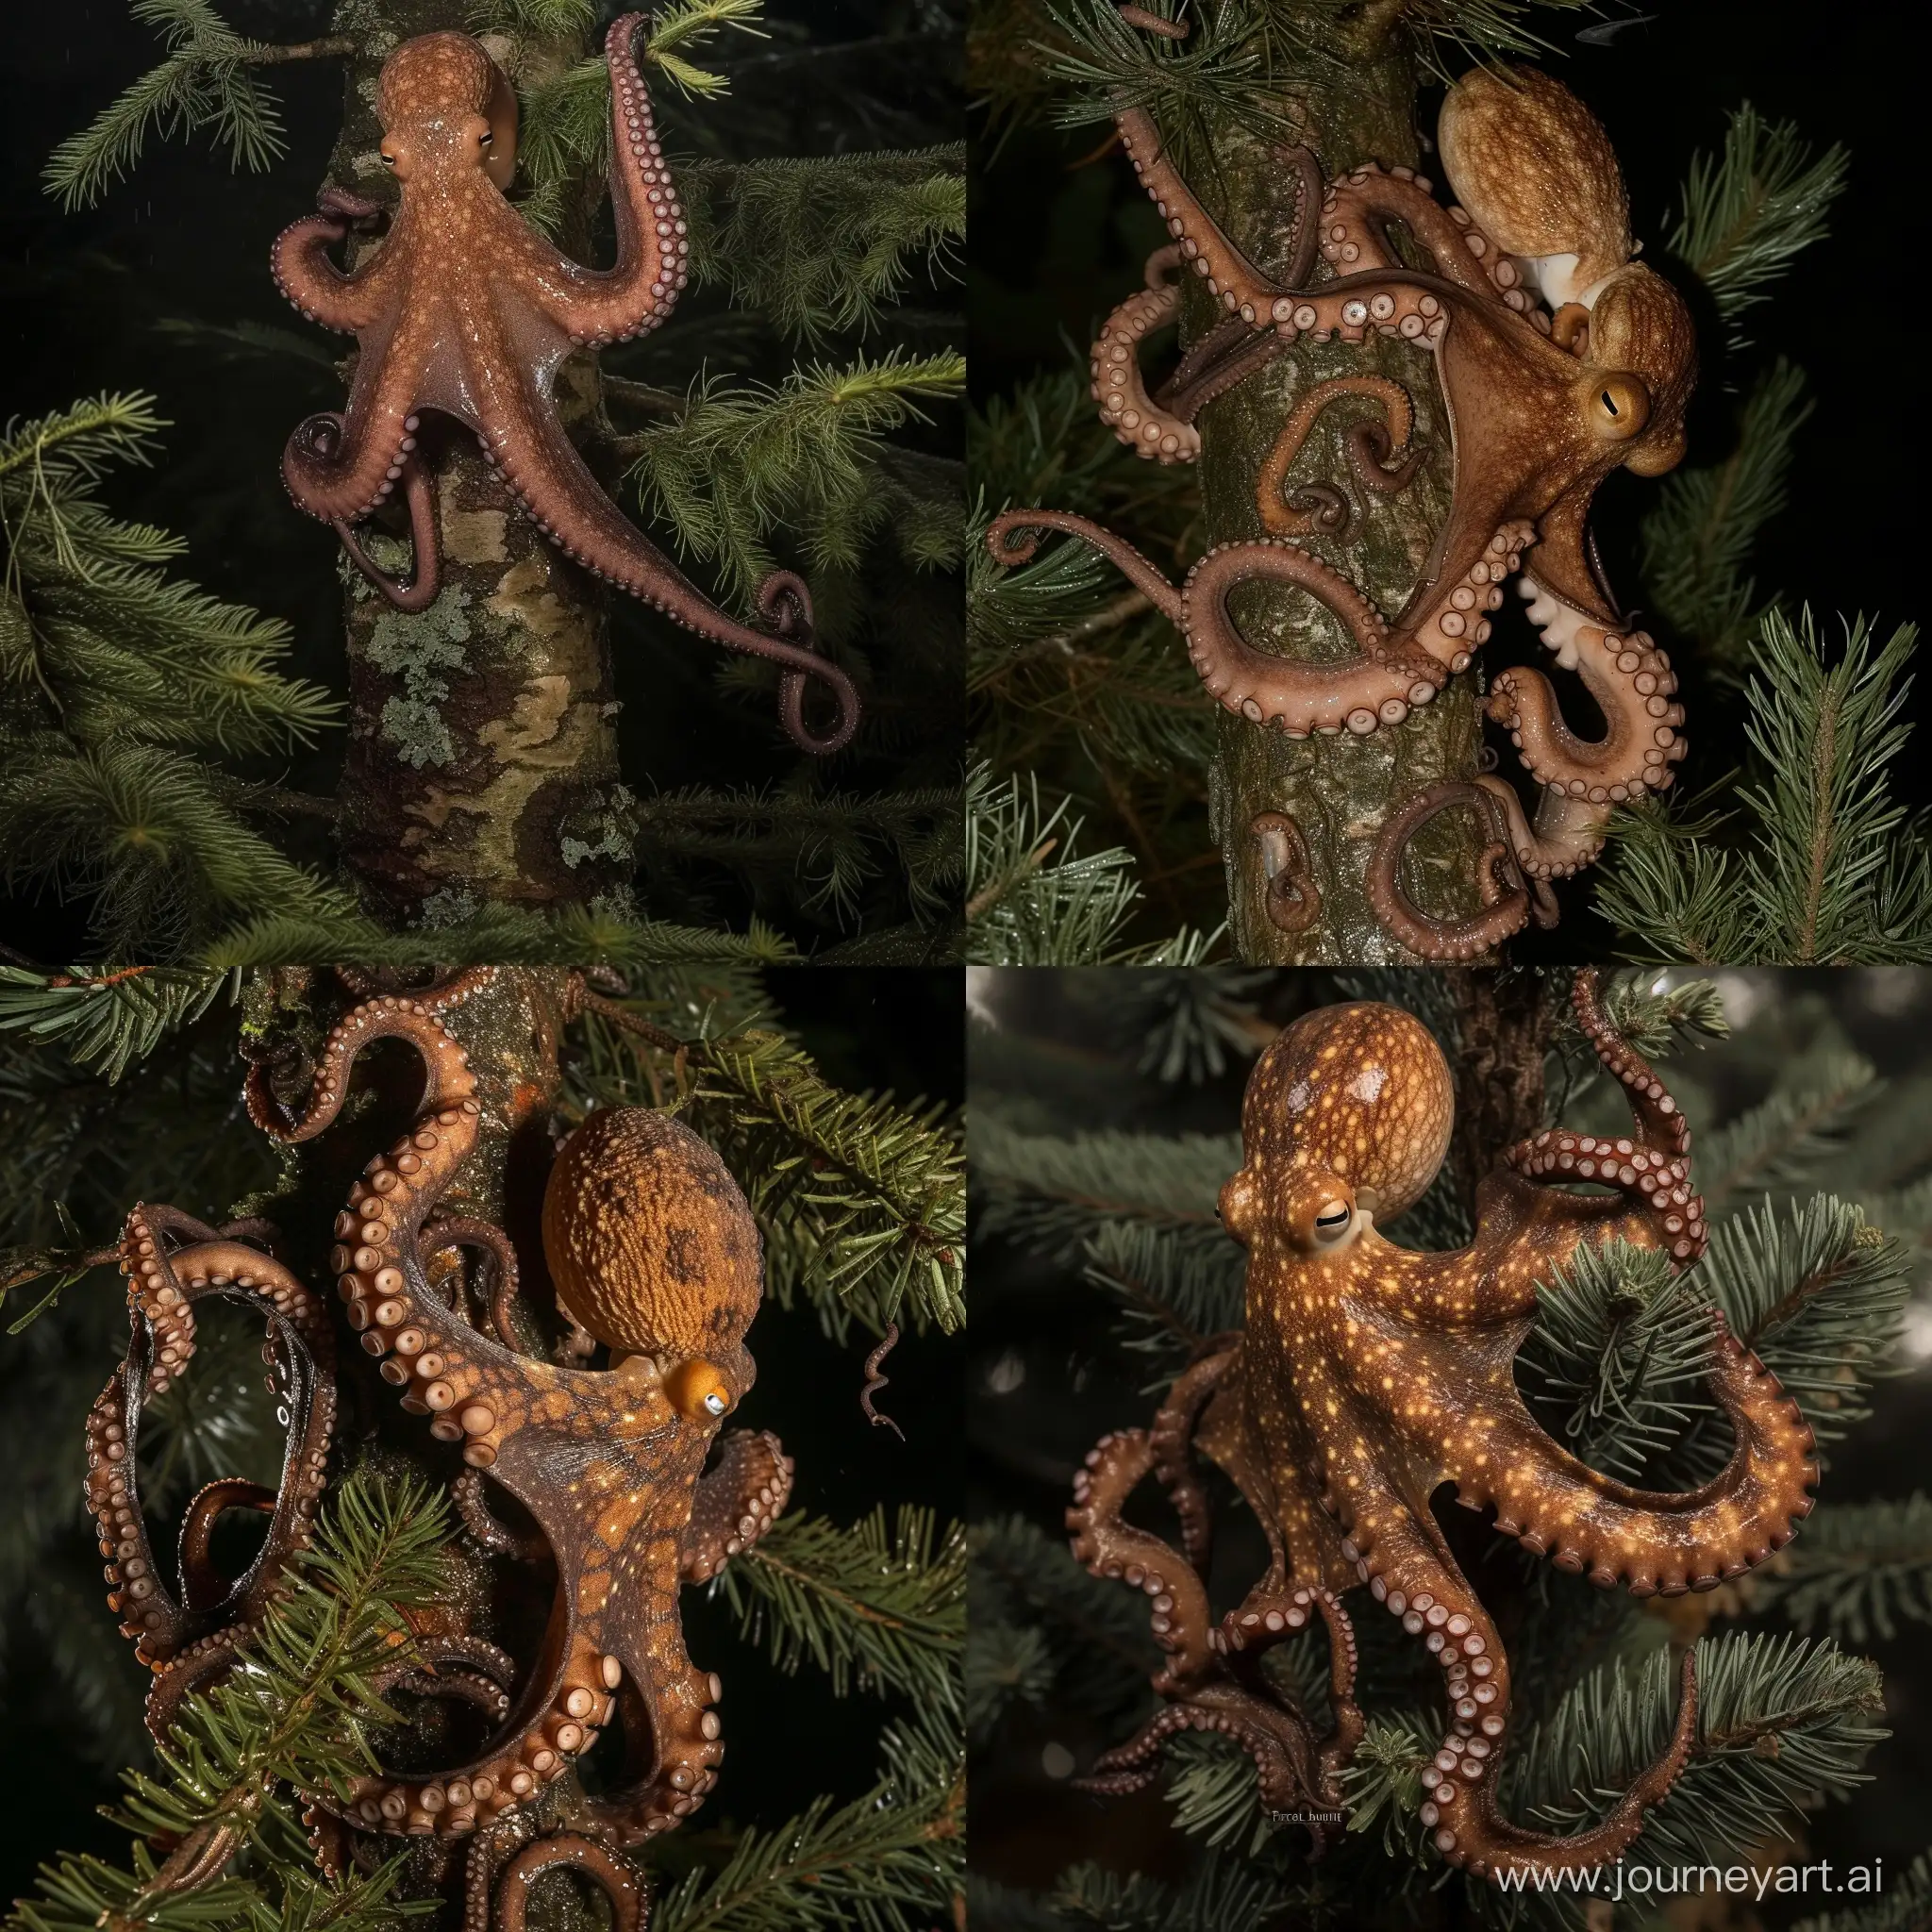 award winning wildlife photo of an wet mottled brown octopus climbing up think pine tree, tentacles wrapped around the branches, body pressed against the tree, temperate pine rainforest, flash photography, telephoto lens, canon camera, extreme wide shot, shot from ground level looking up, Frans Lanting, nature documentary